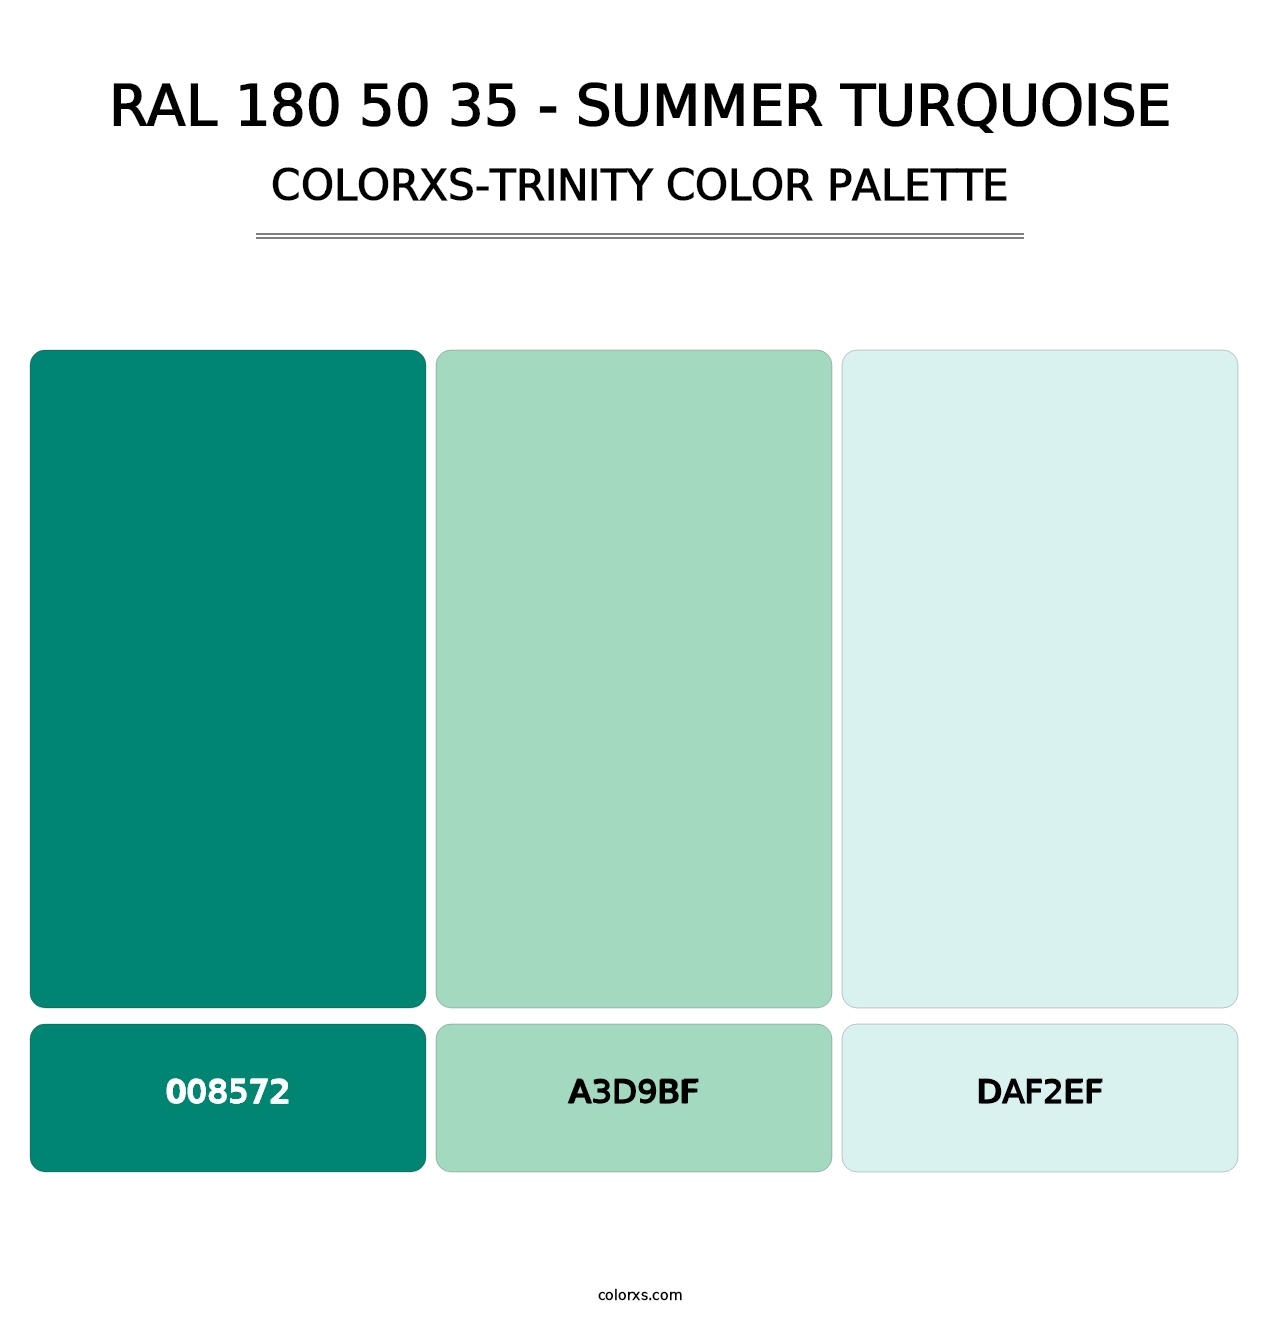 RAL 180 50 35 - Summer Turquoise - Colorxs Trinity Palette